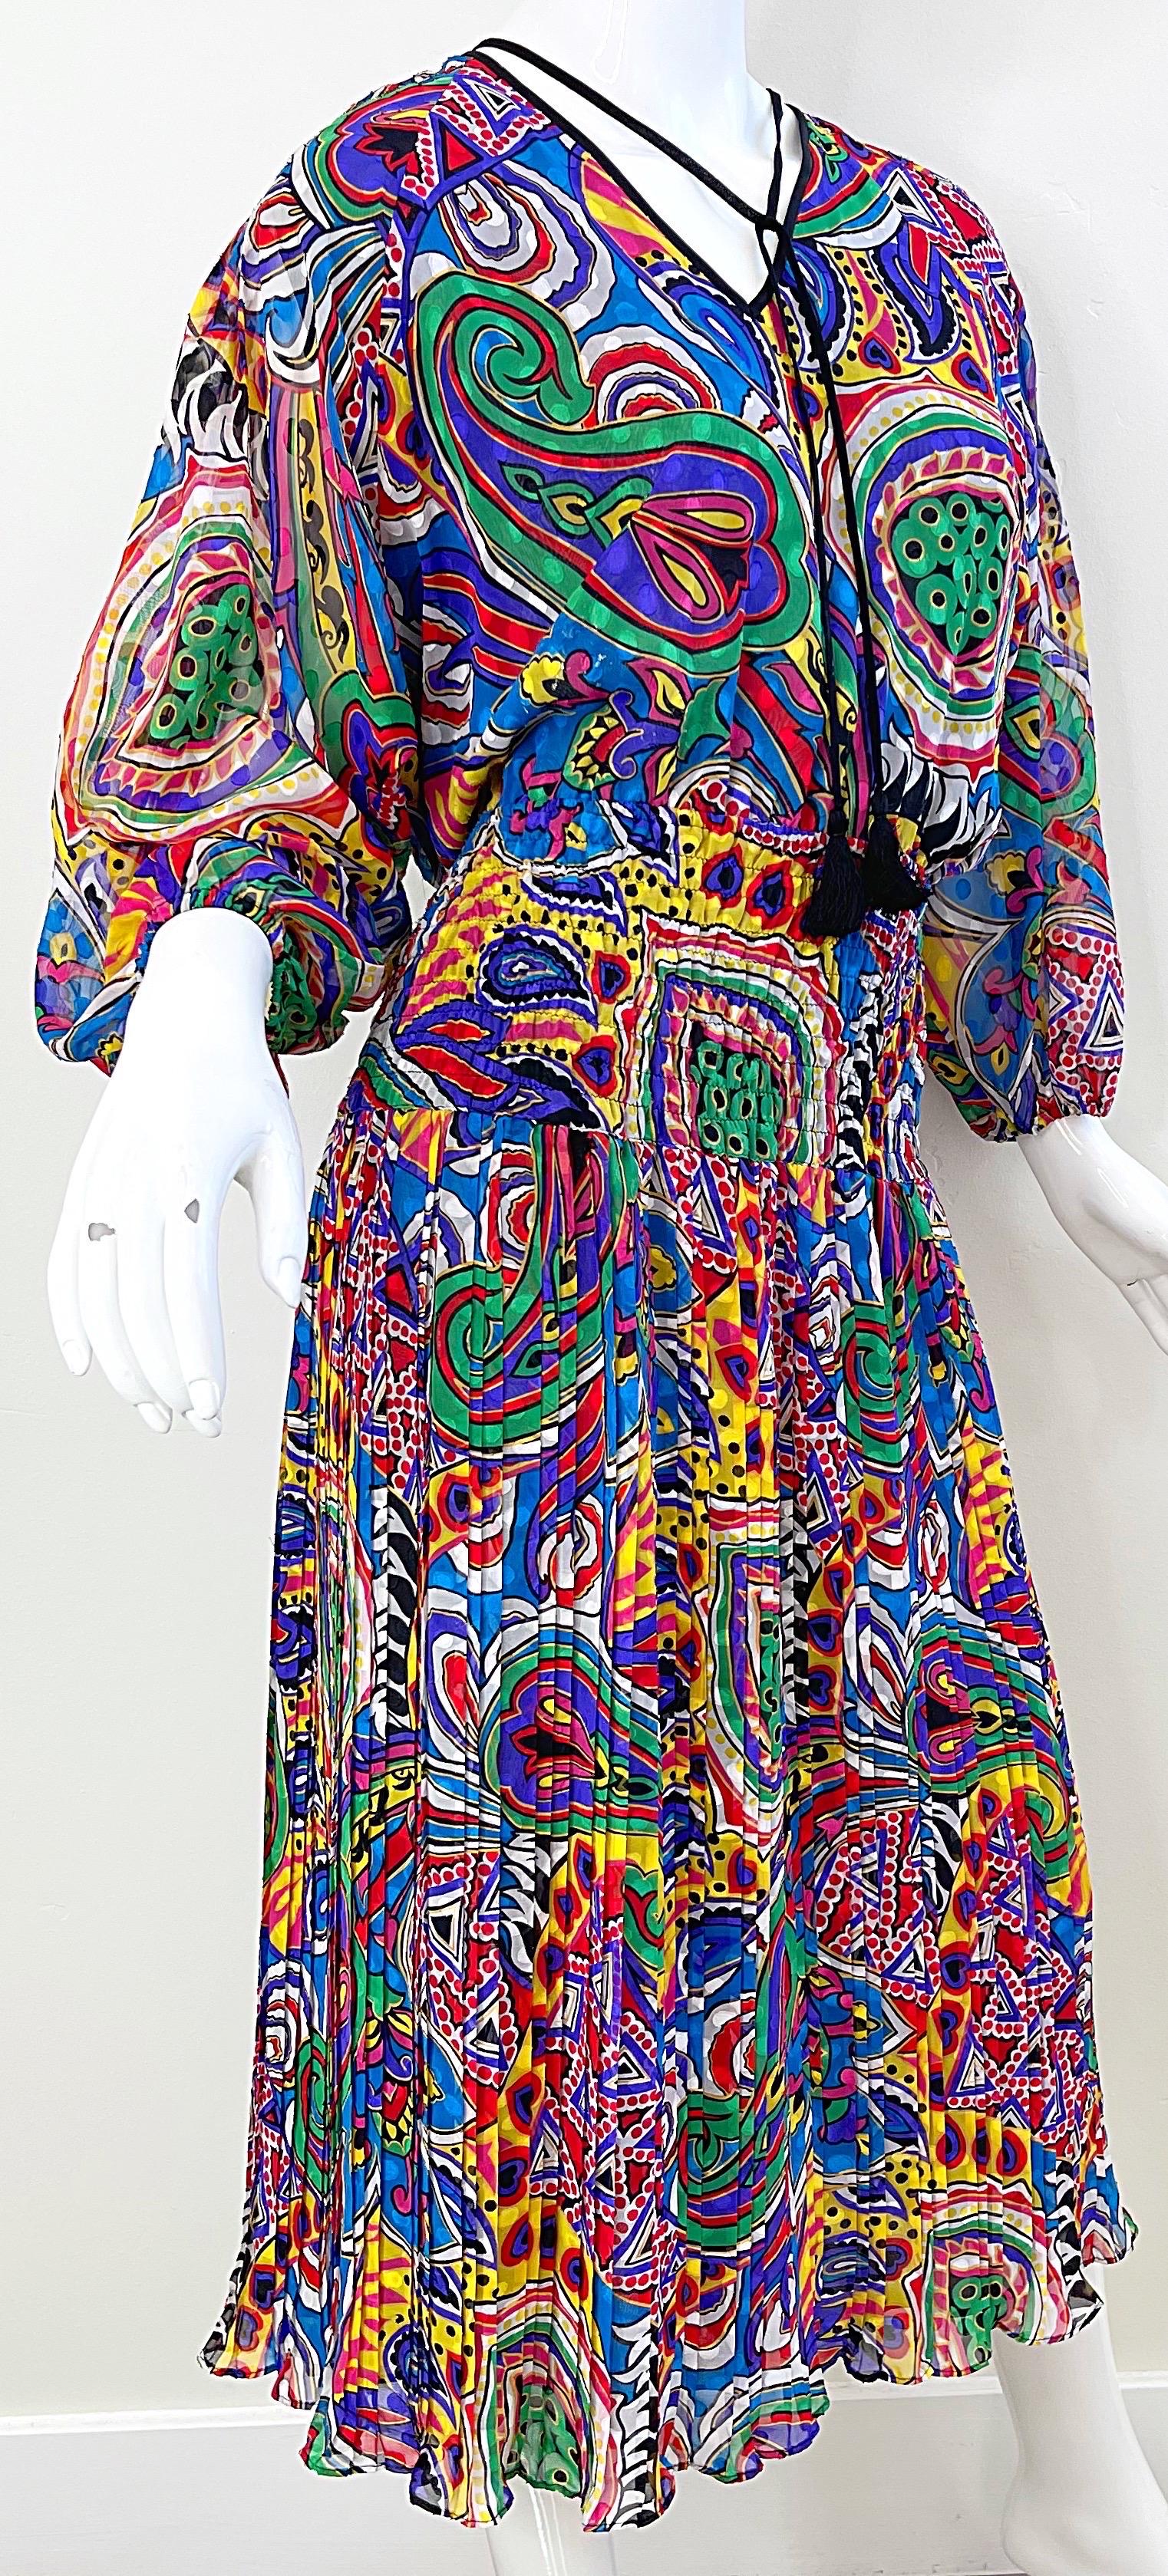 Women's Diane Freis 1980s Novelty Heart Paisley Psychedelic Print Vintage 80s Dress For Sale